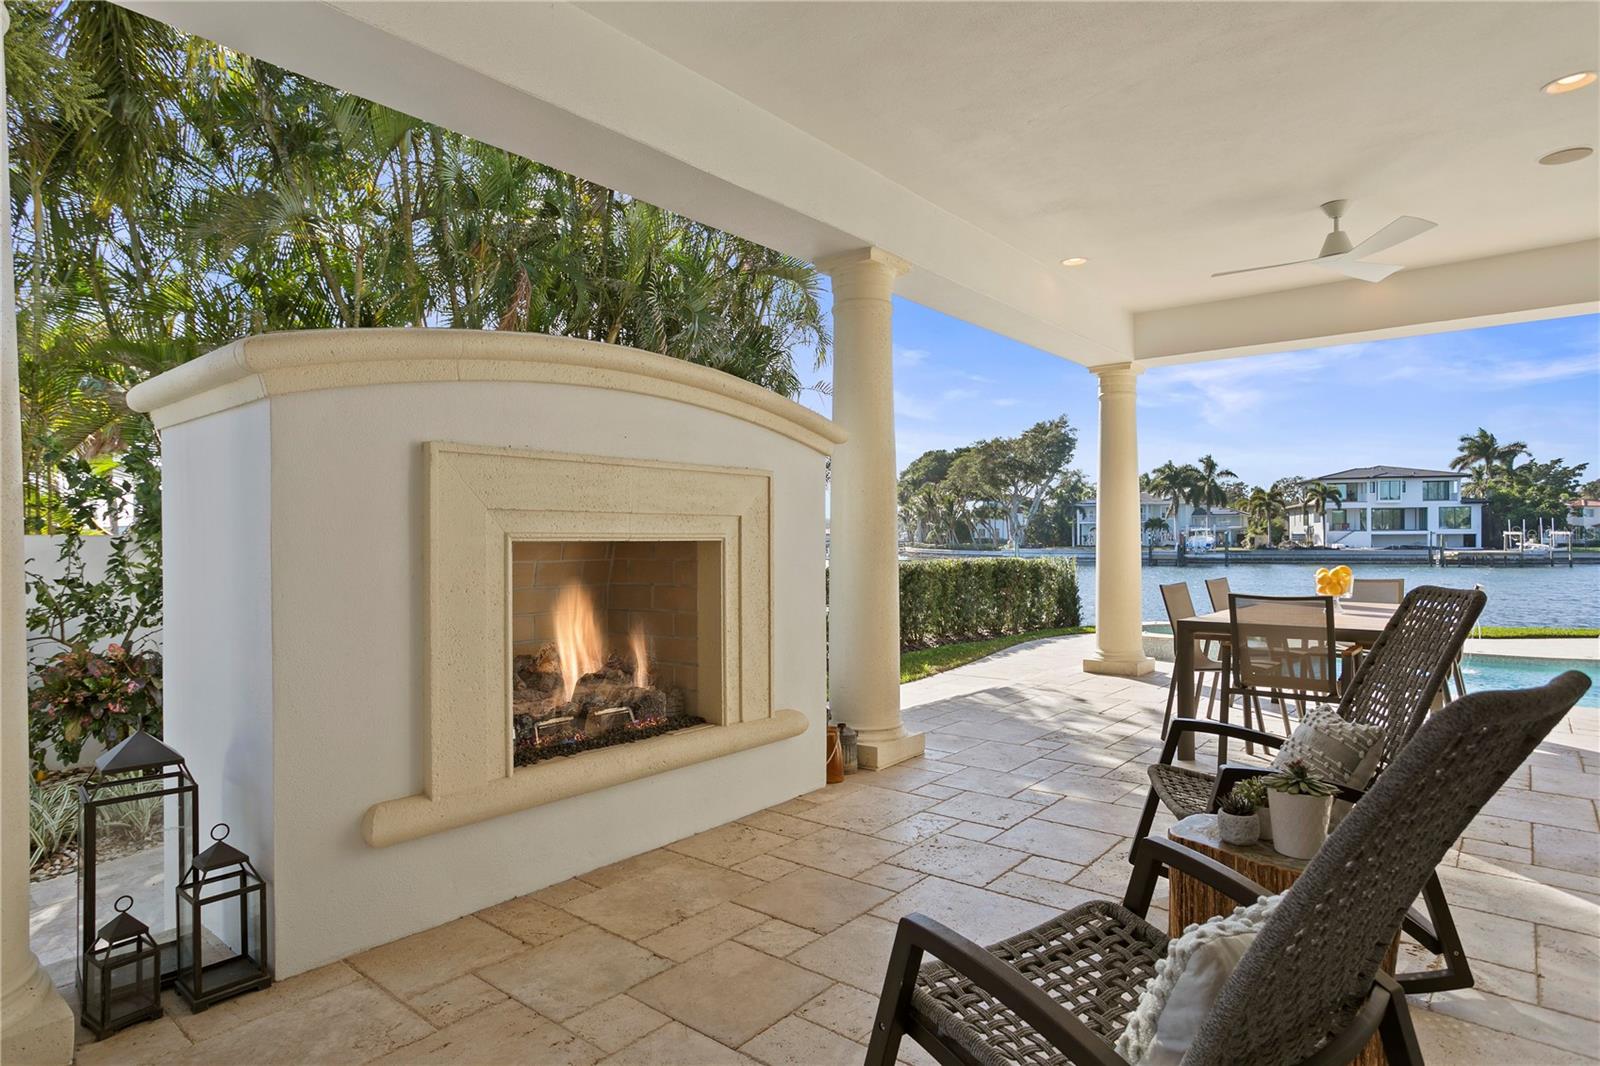 Those cozy nights are just perfect by the outdoor fireplace.